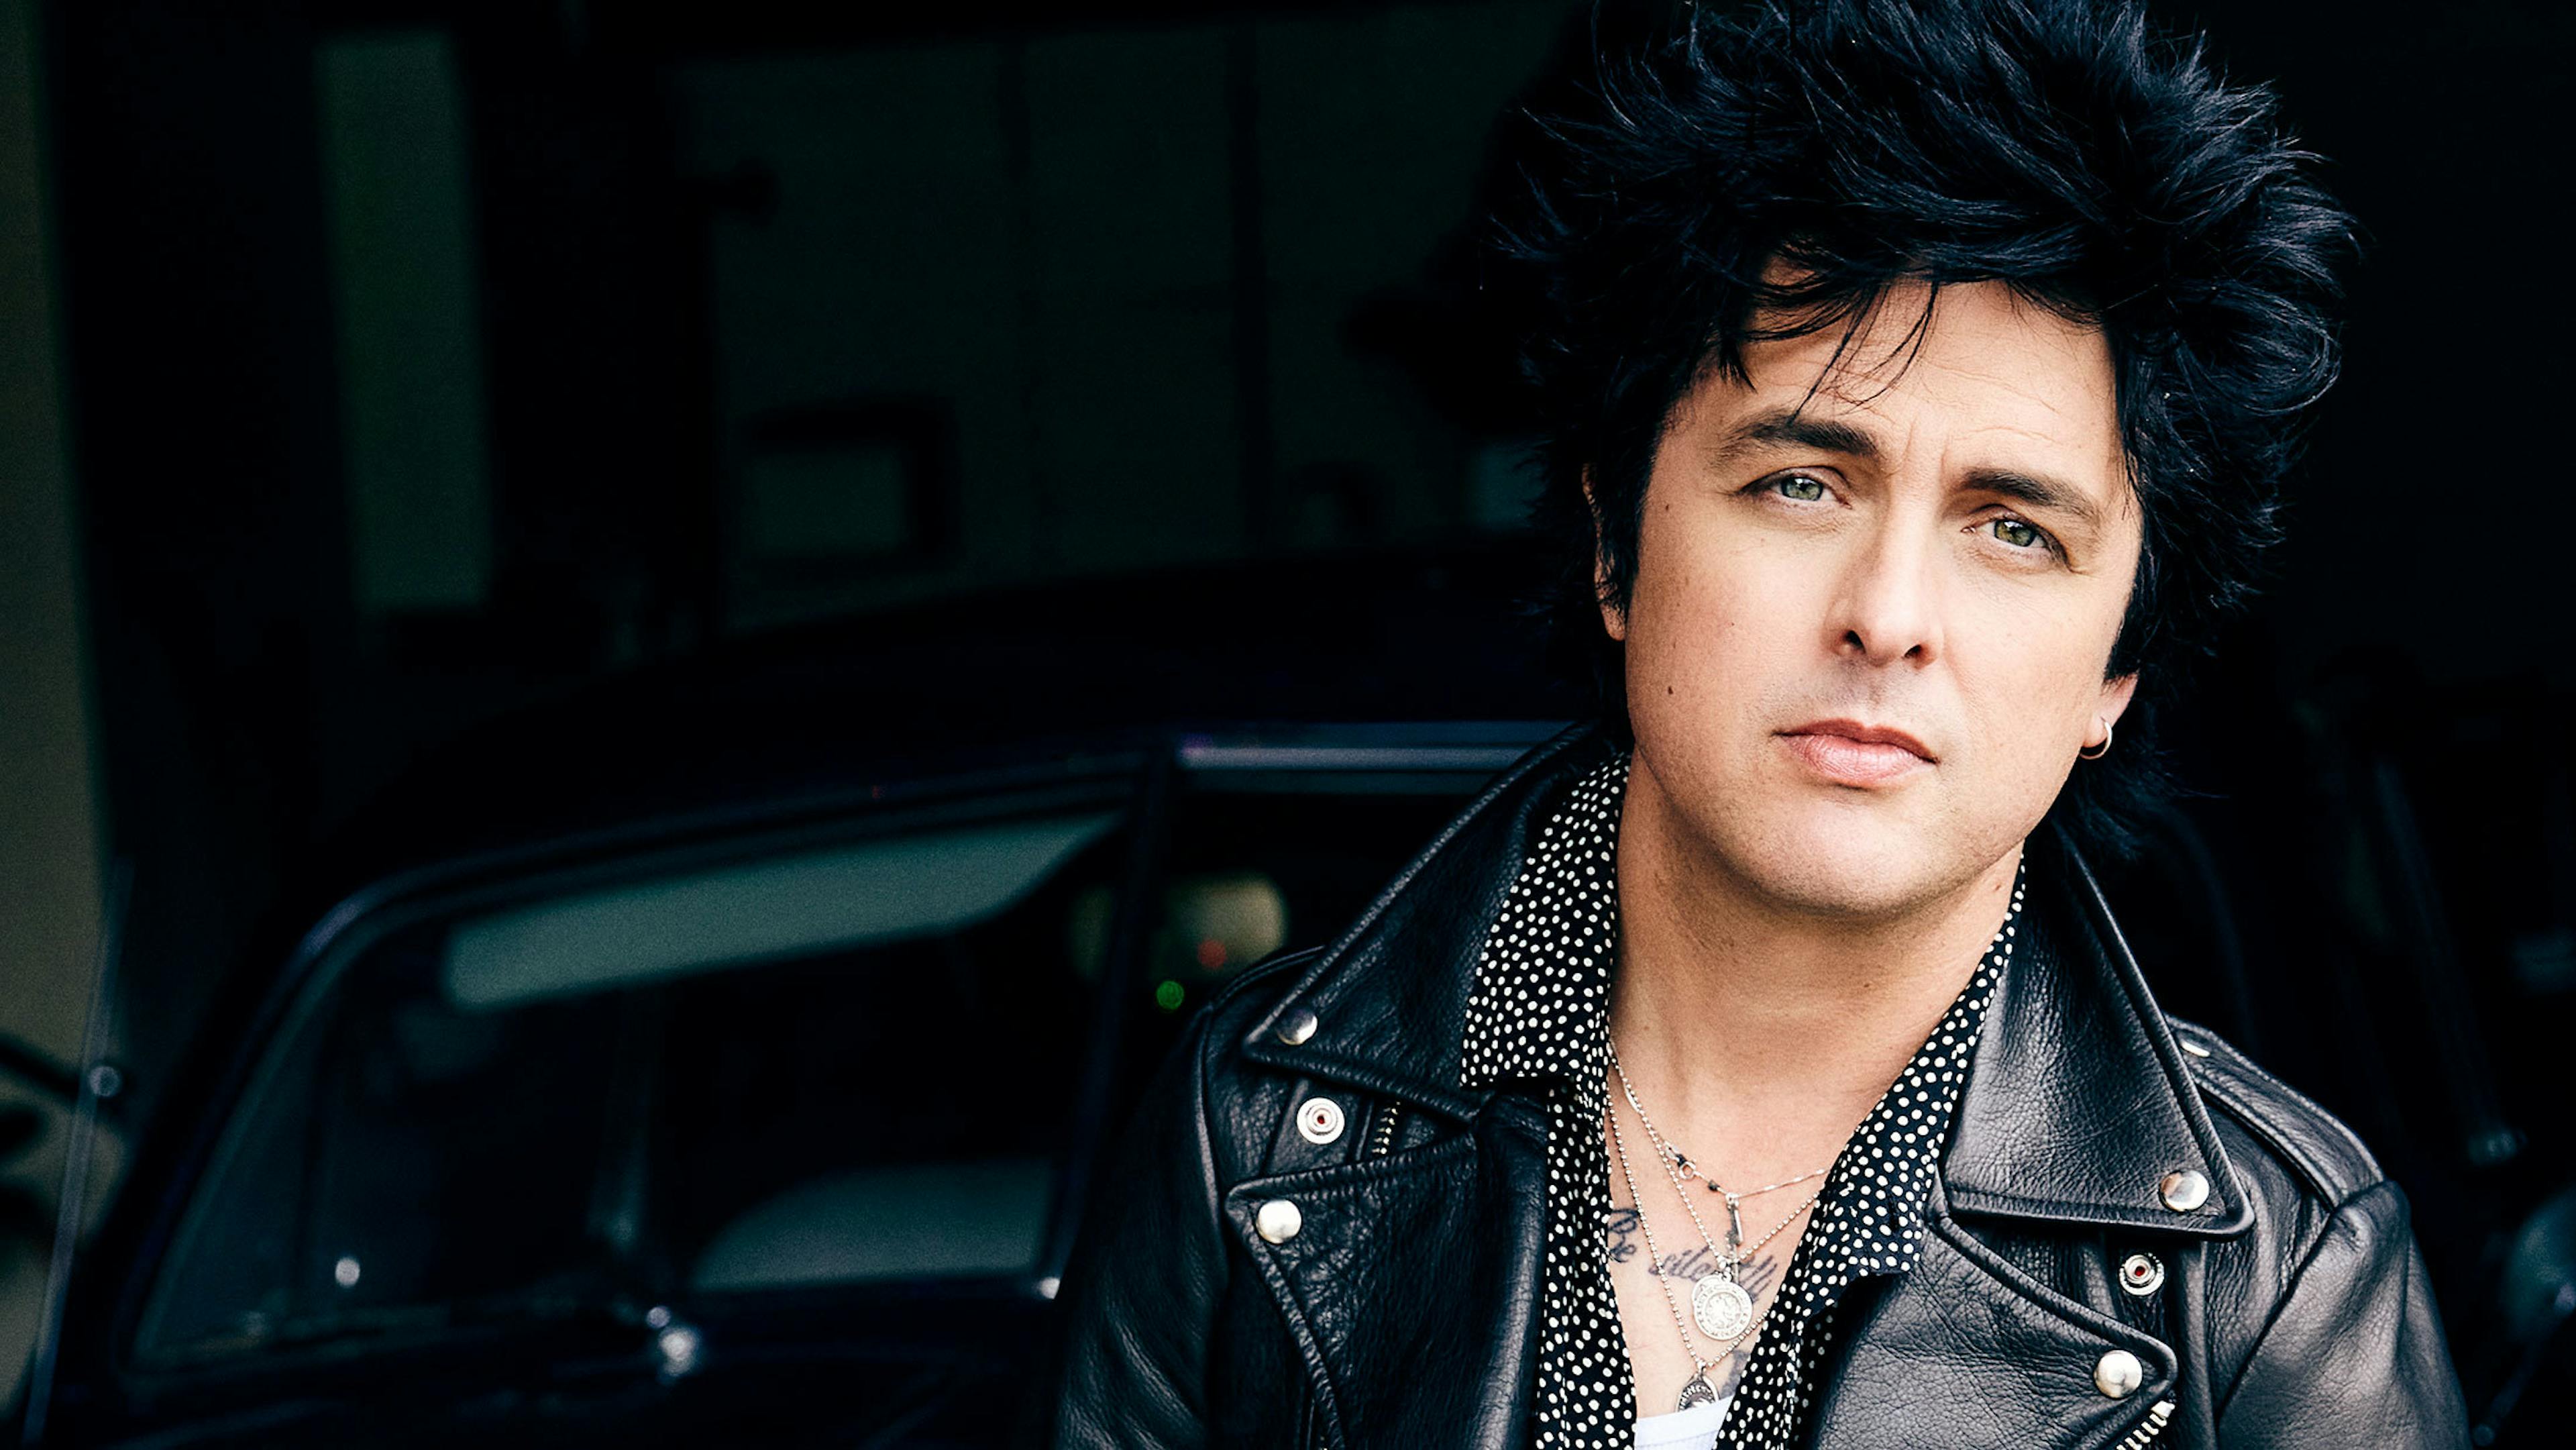 Billie Joe Armstrong On How "Uncomfortable" Fame Can Be: "Everyone's Got A Camera In Their Pocket"